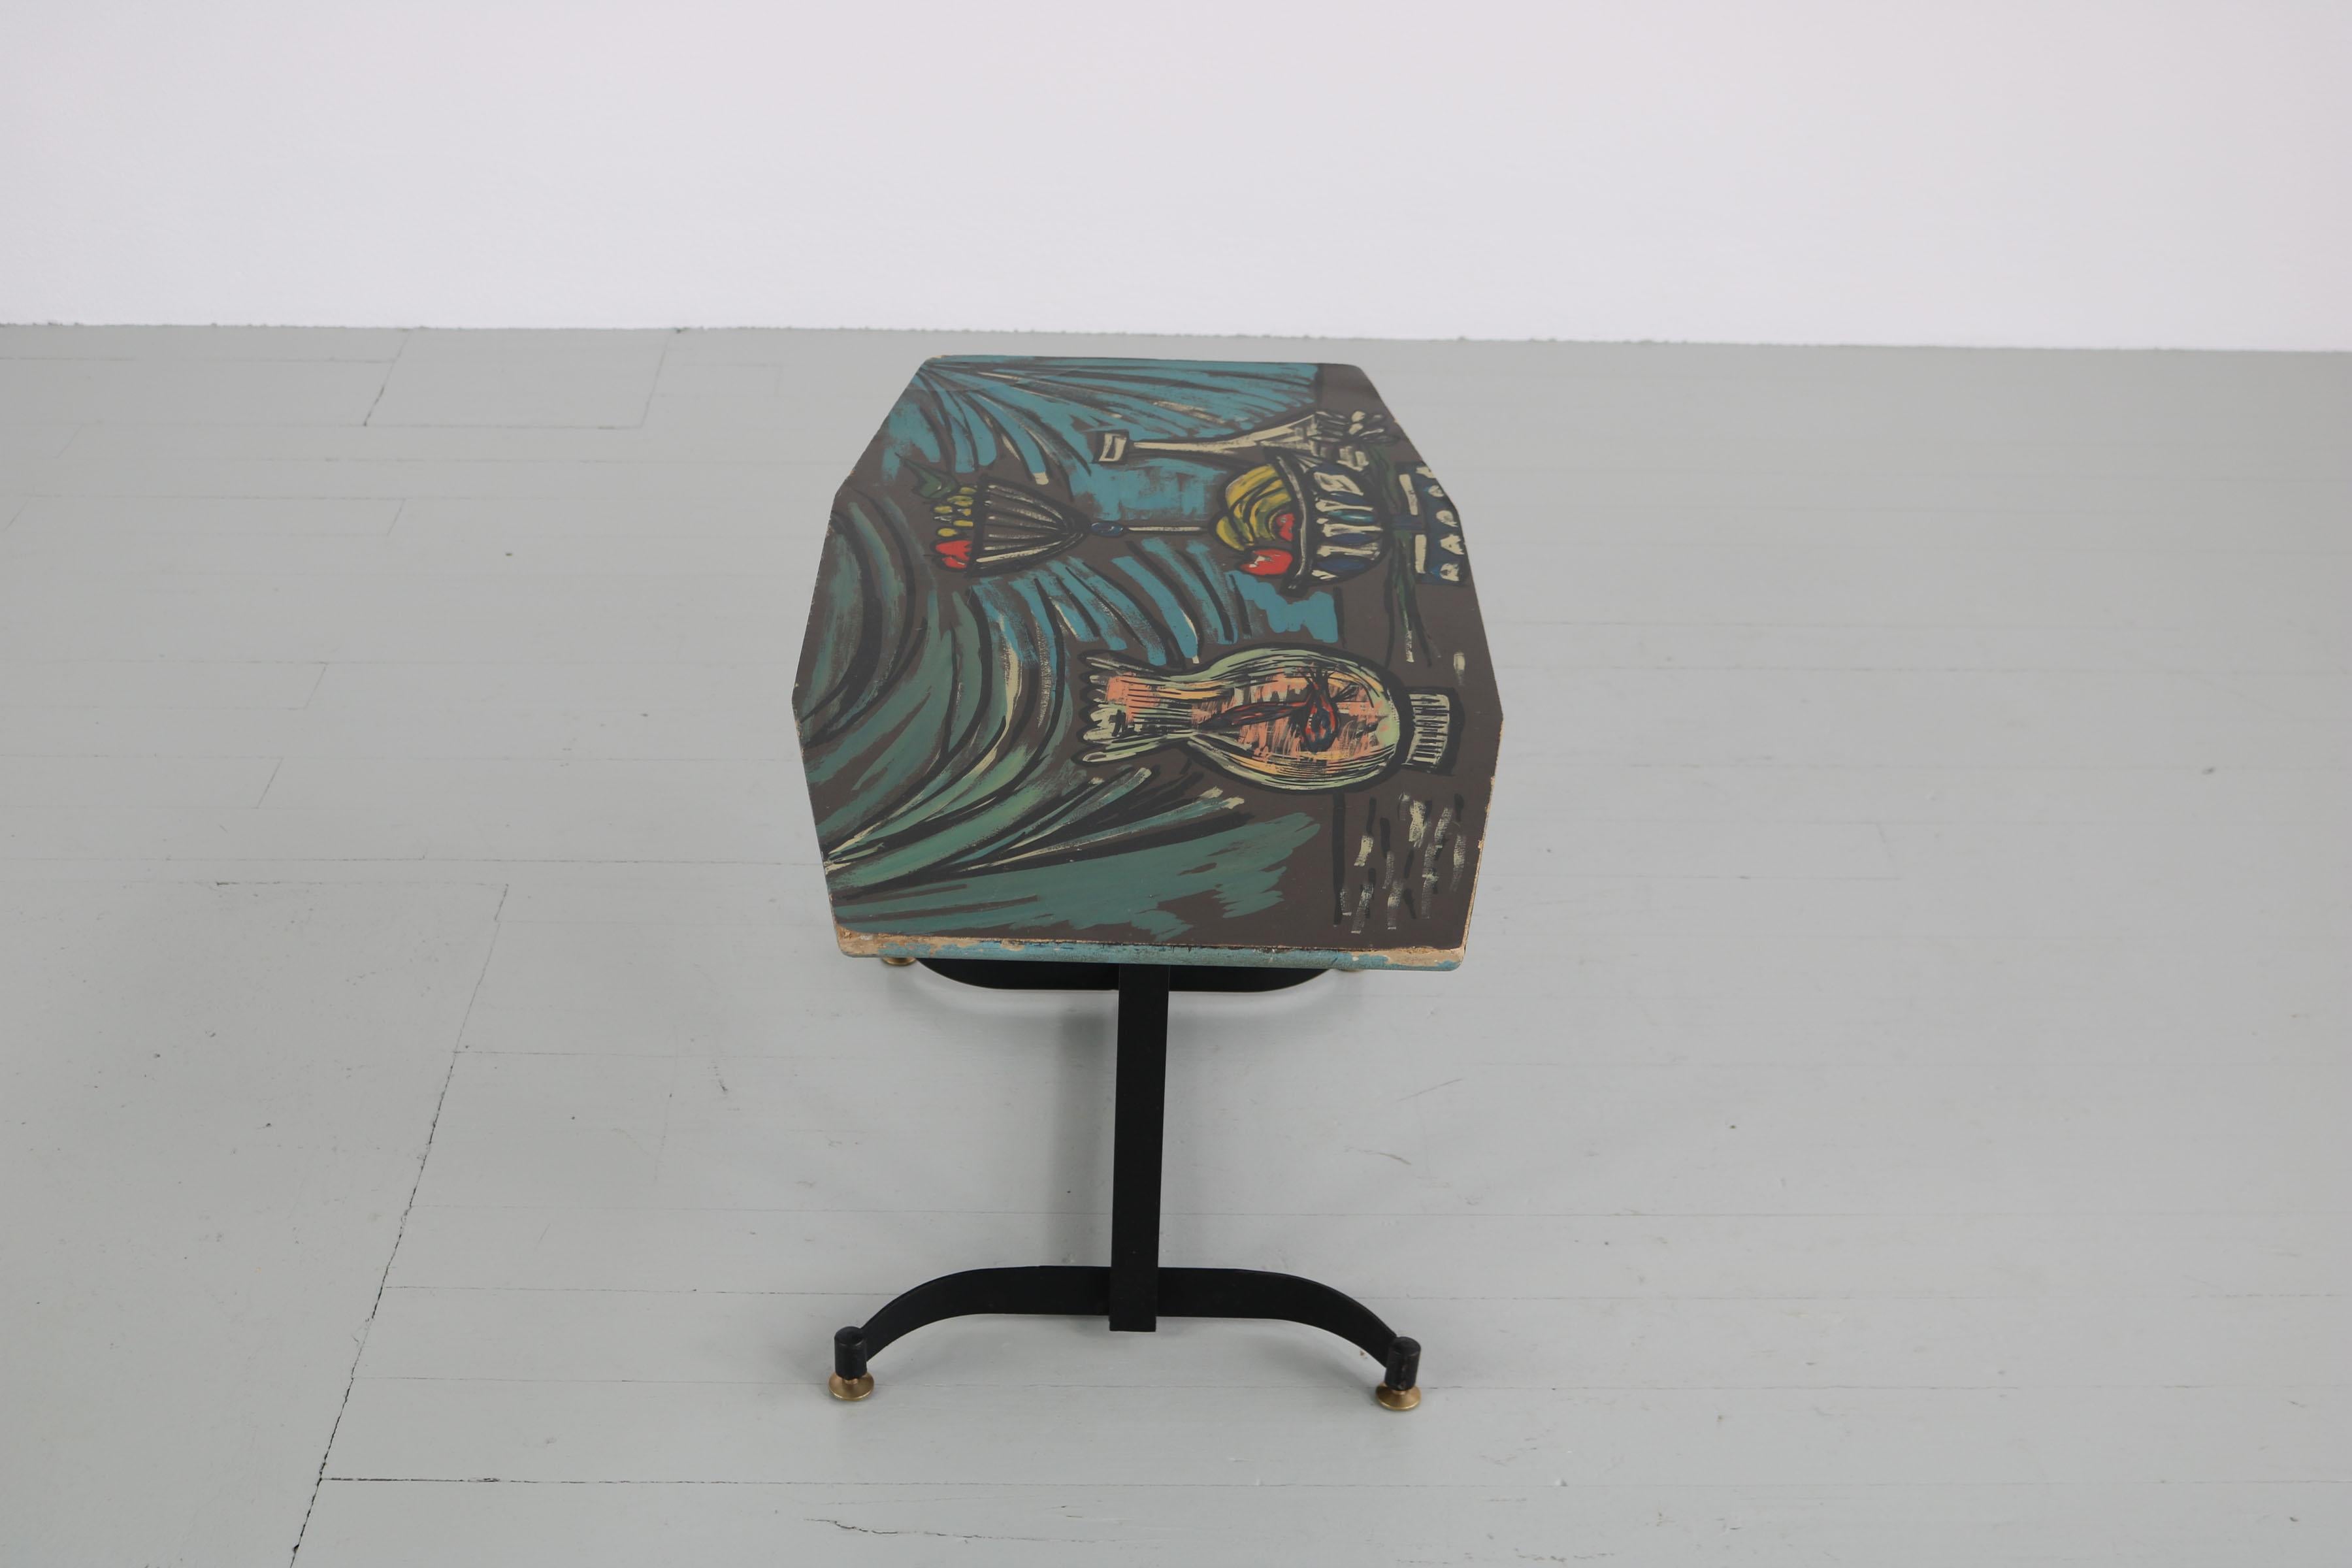 Italian Dark Sofa Table with Colorful Hand-Painted Motives on Table Top, 1950s For Sale 7